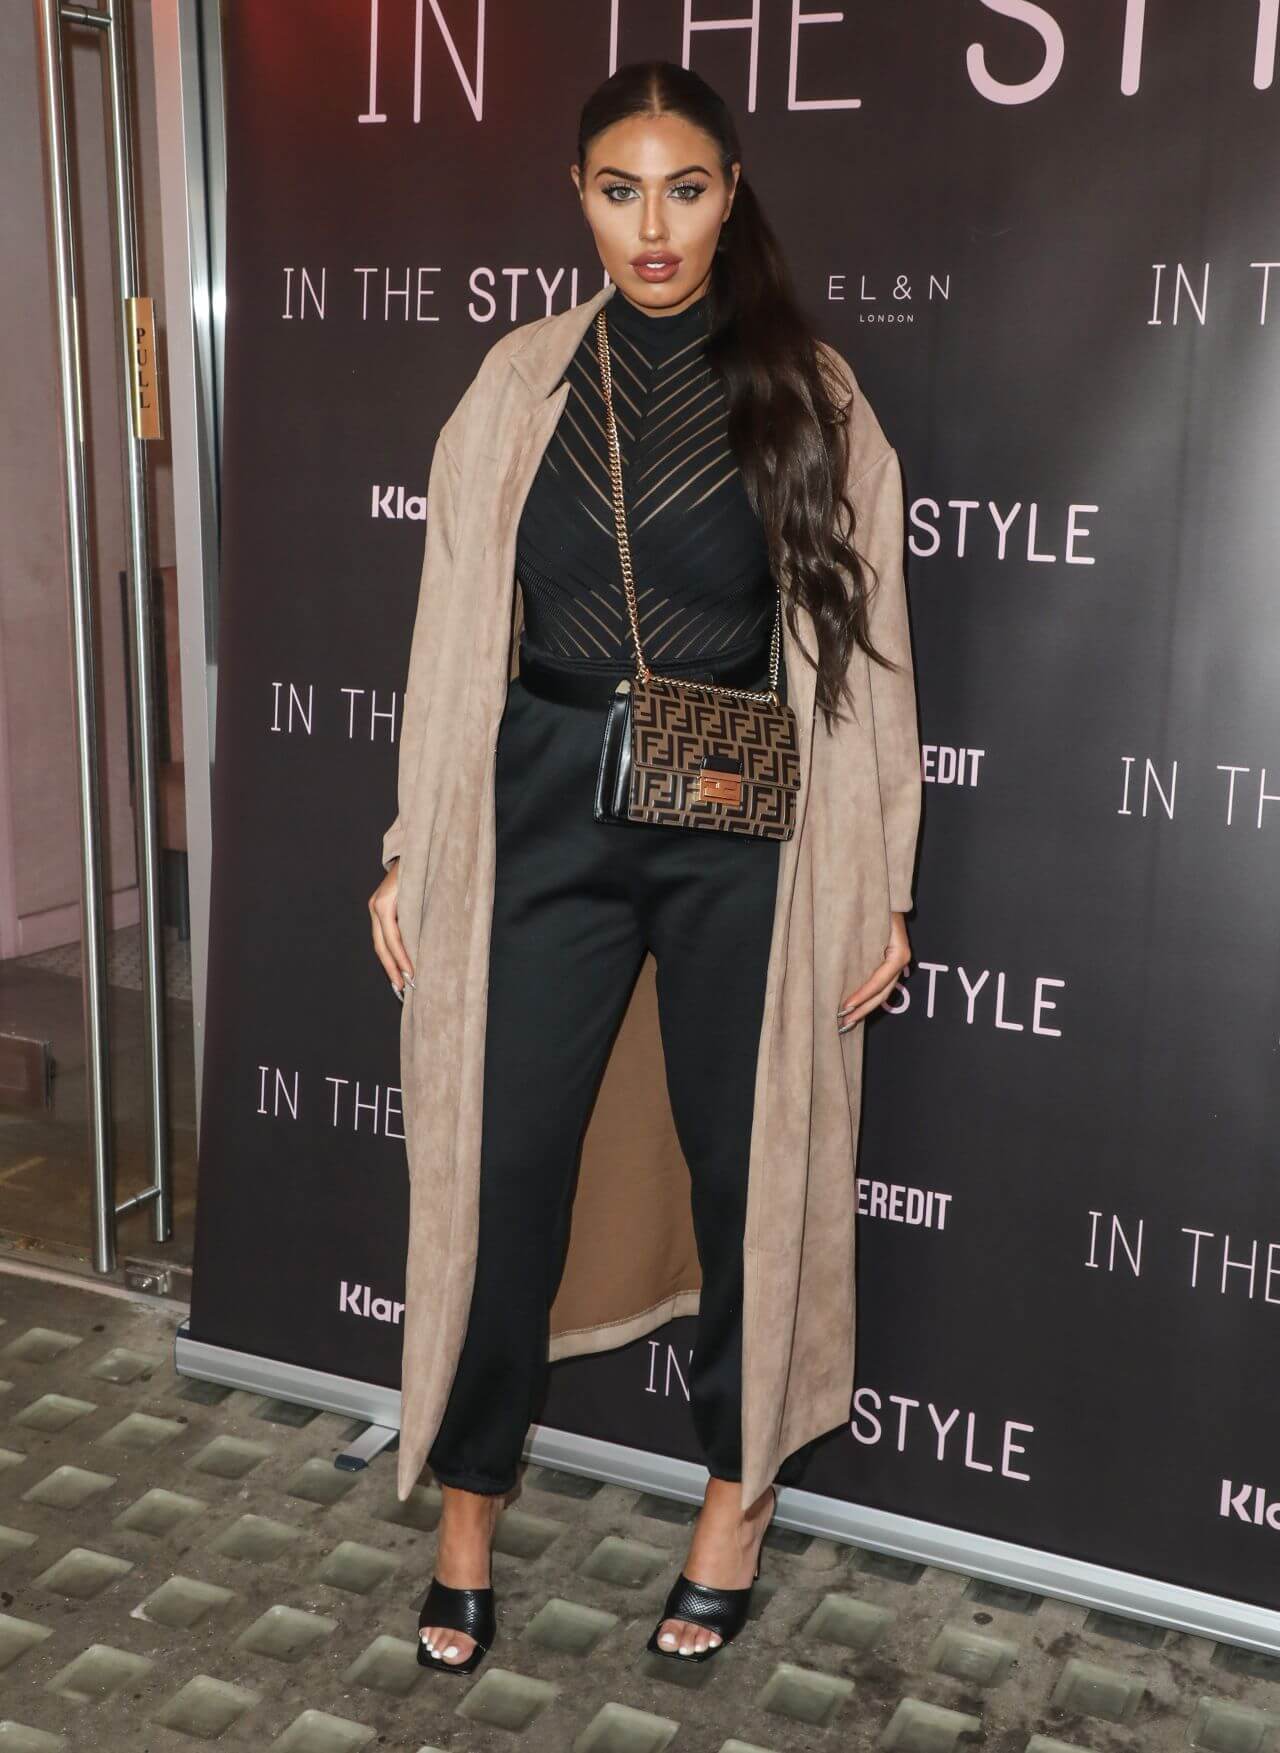 Anna Vakili  In Black Full Sleeves Top & Pants With Long Jacket At Press Launch for The Style in London